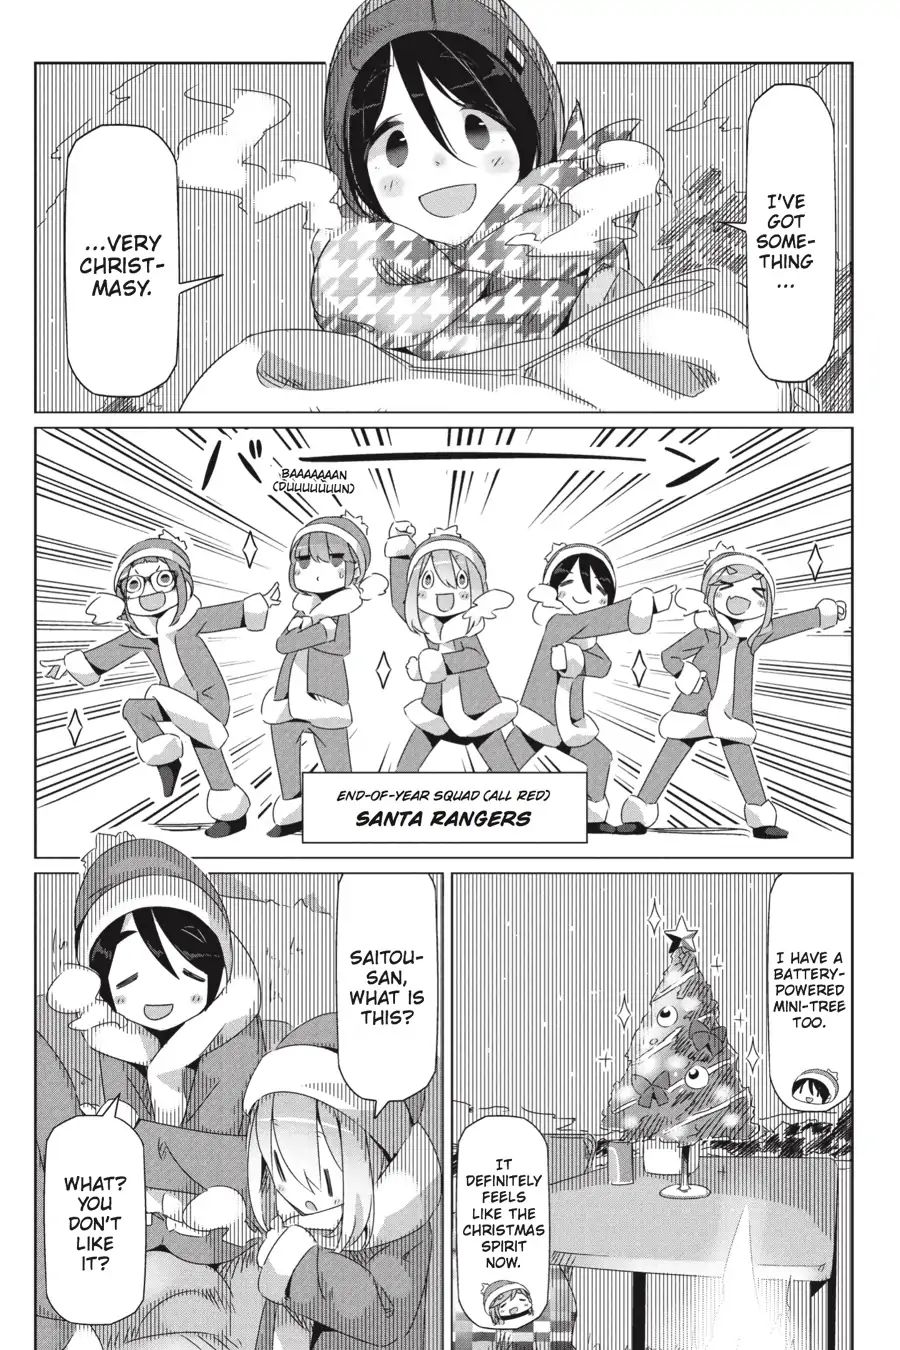 Yurucamp Vol.4 Chapter 22: A Special Meal